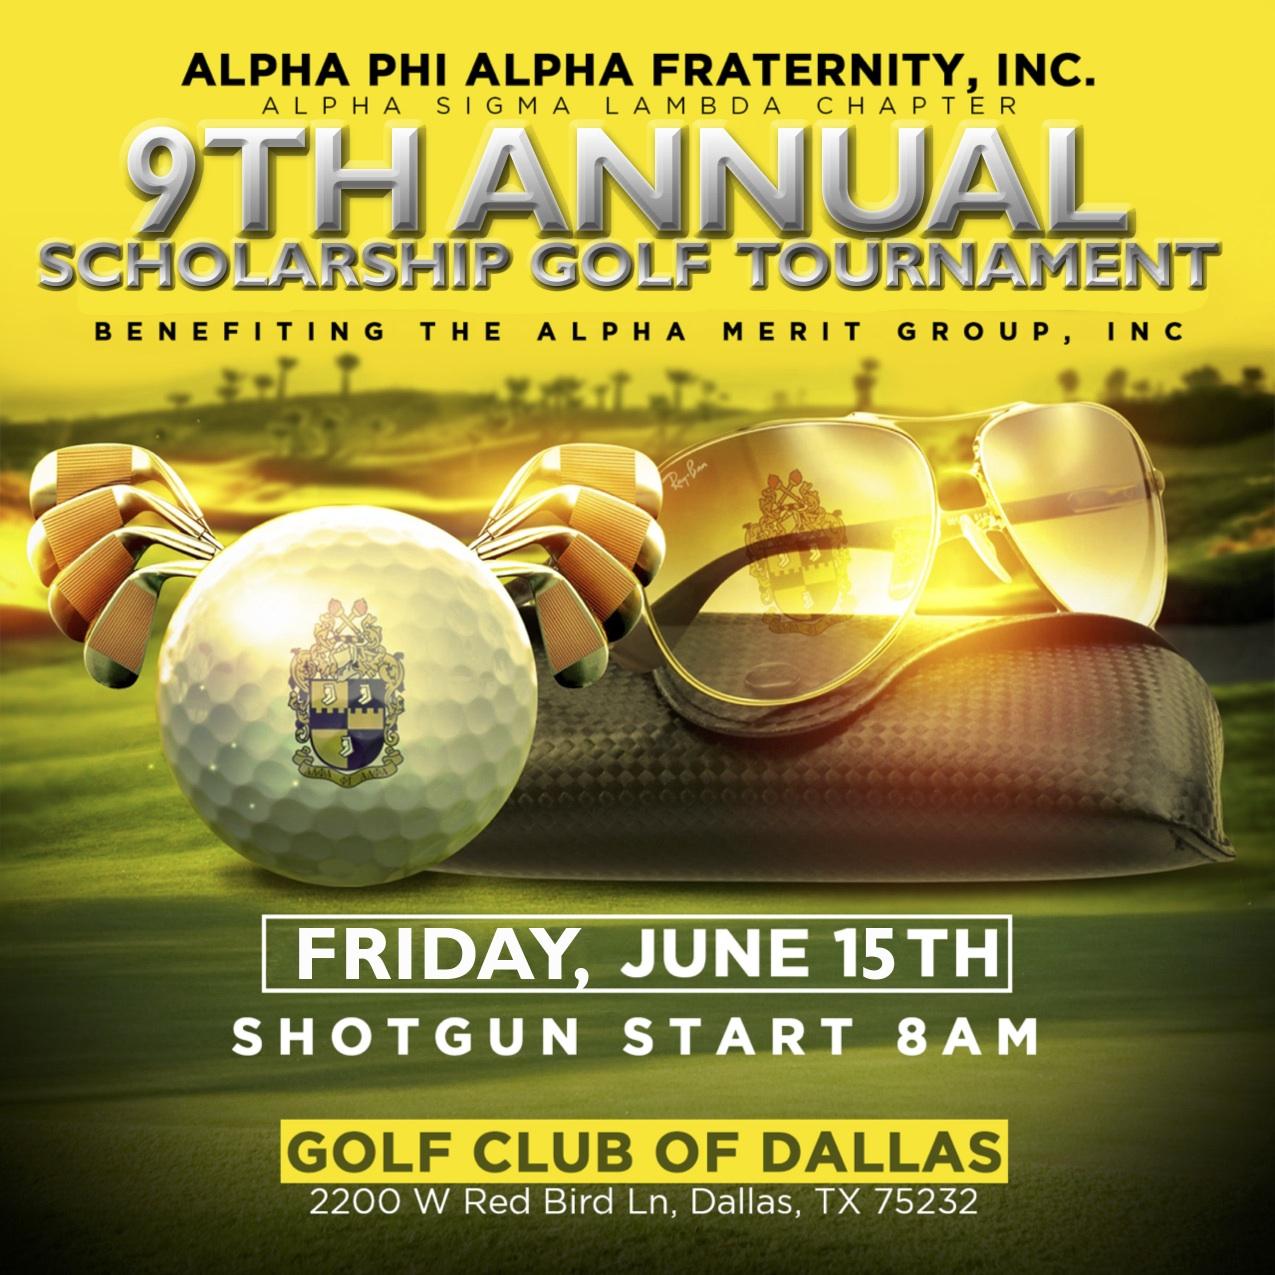 9th Annual Golf Tournament presented by Alpha Phi Alpha Fraternity, Inc. Alpha Sigma Lambda Chapter